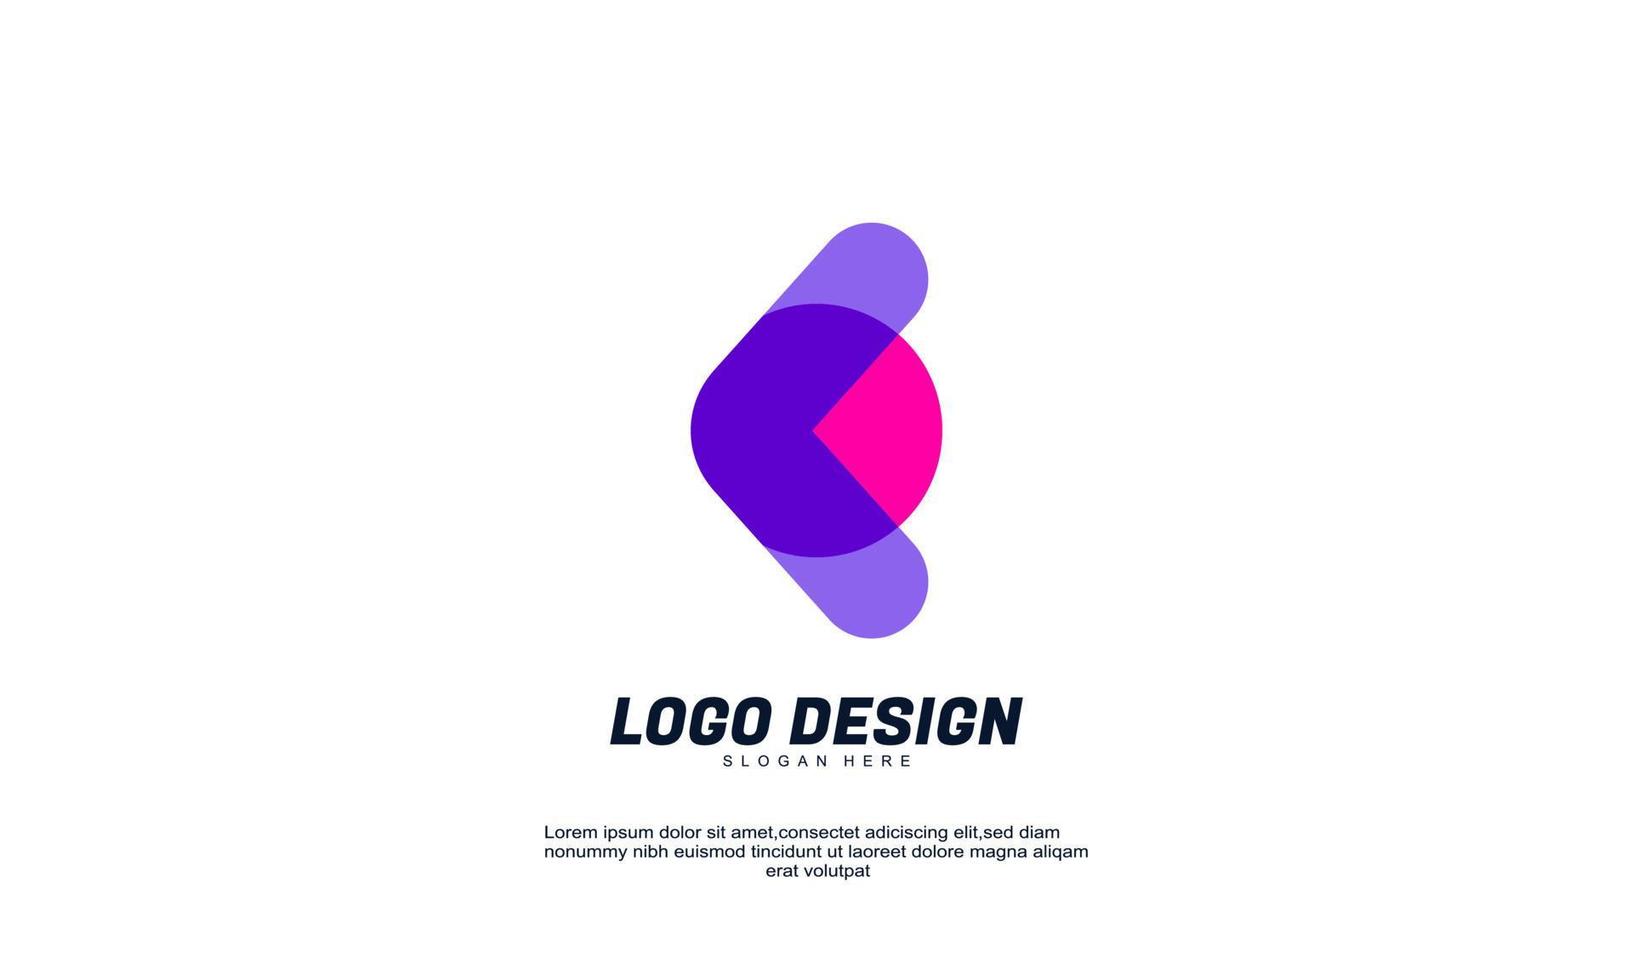 stock abstract creative modern icon design logo elements best for company identity and logotypes vector